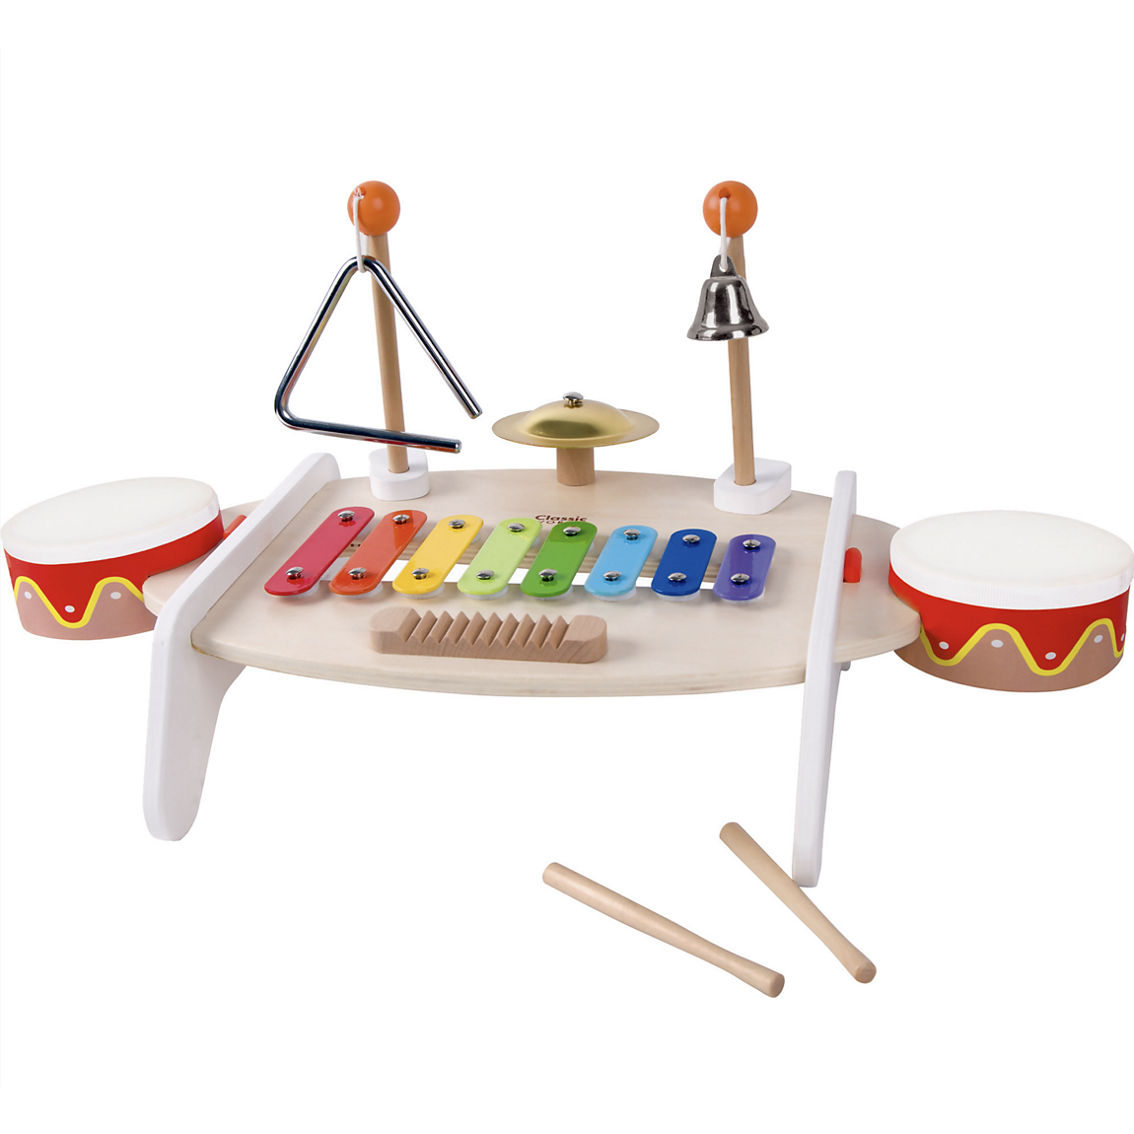 Classic Toy Wood Music Table - Image 4 of 6